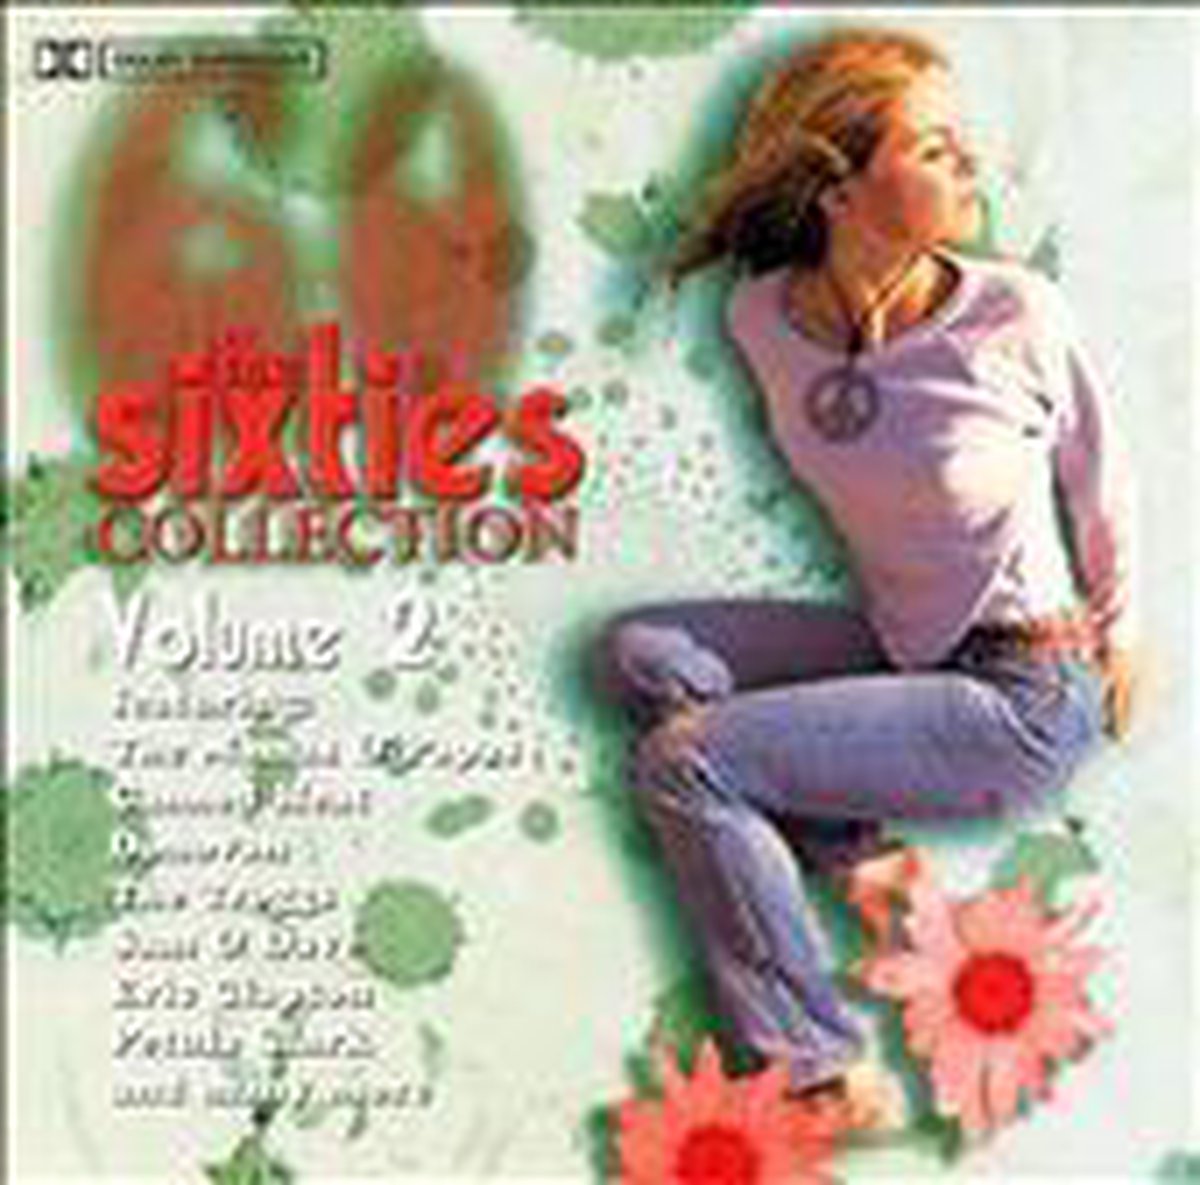 Sixties Collection, Vol. 2 - various artists